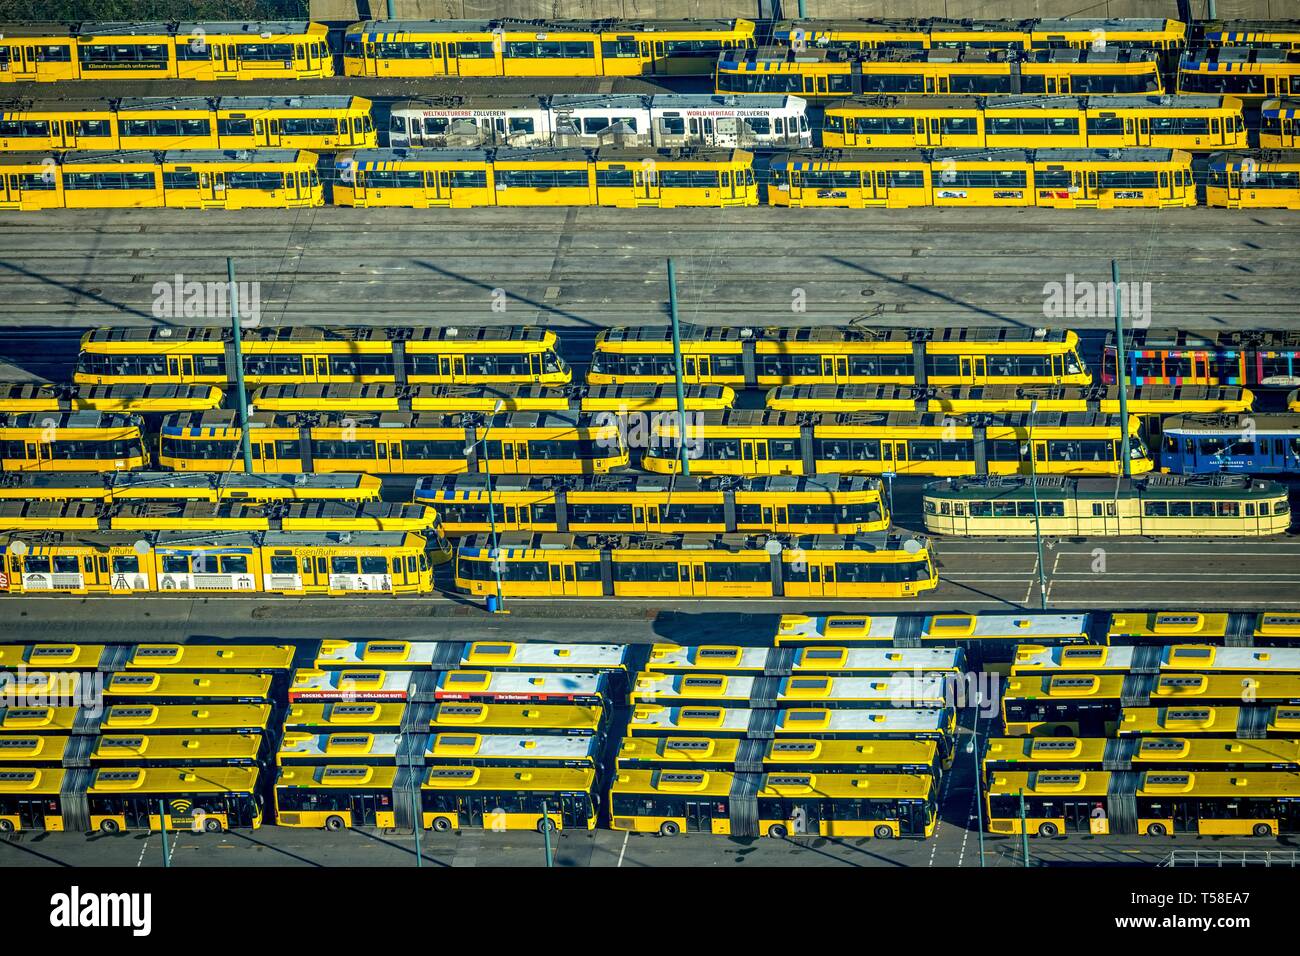 Aerial view, tram depot and bus depot, Essener Verkehrs AG, EVAG, parked vehicles in rows, yellow trams, yellow buses, Essen, North Rhine-Westphalia Stock Photo